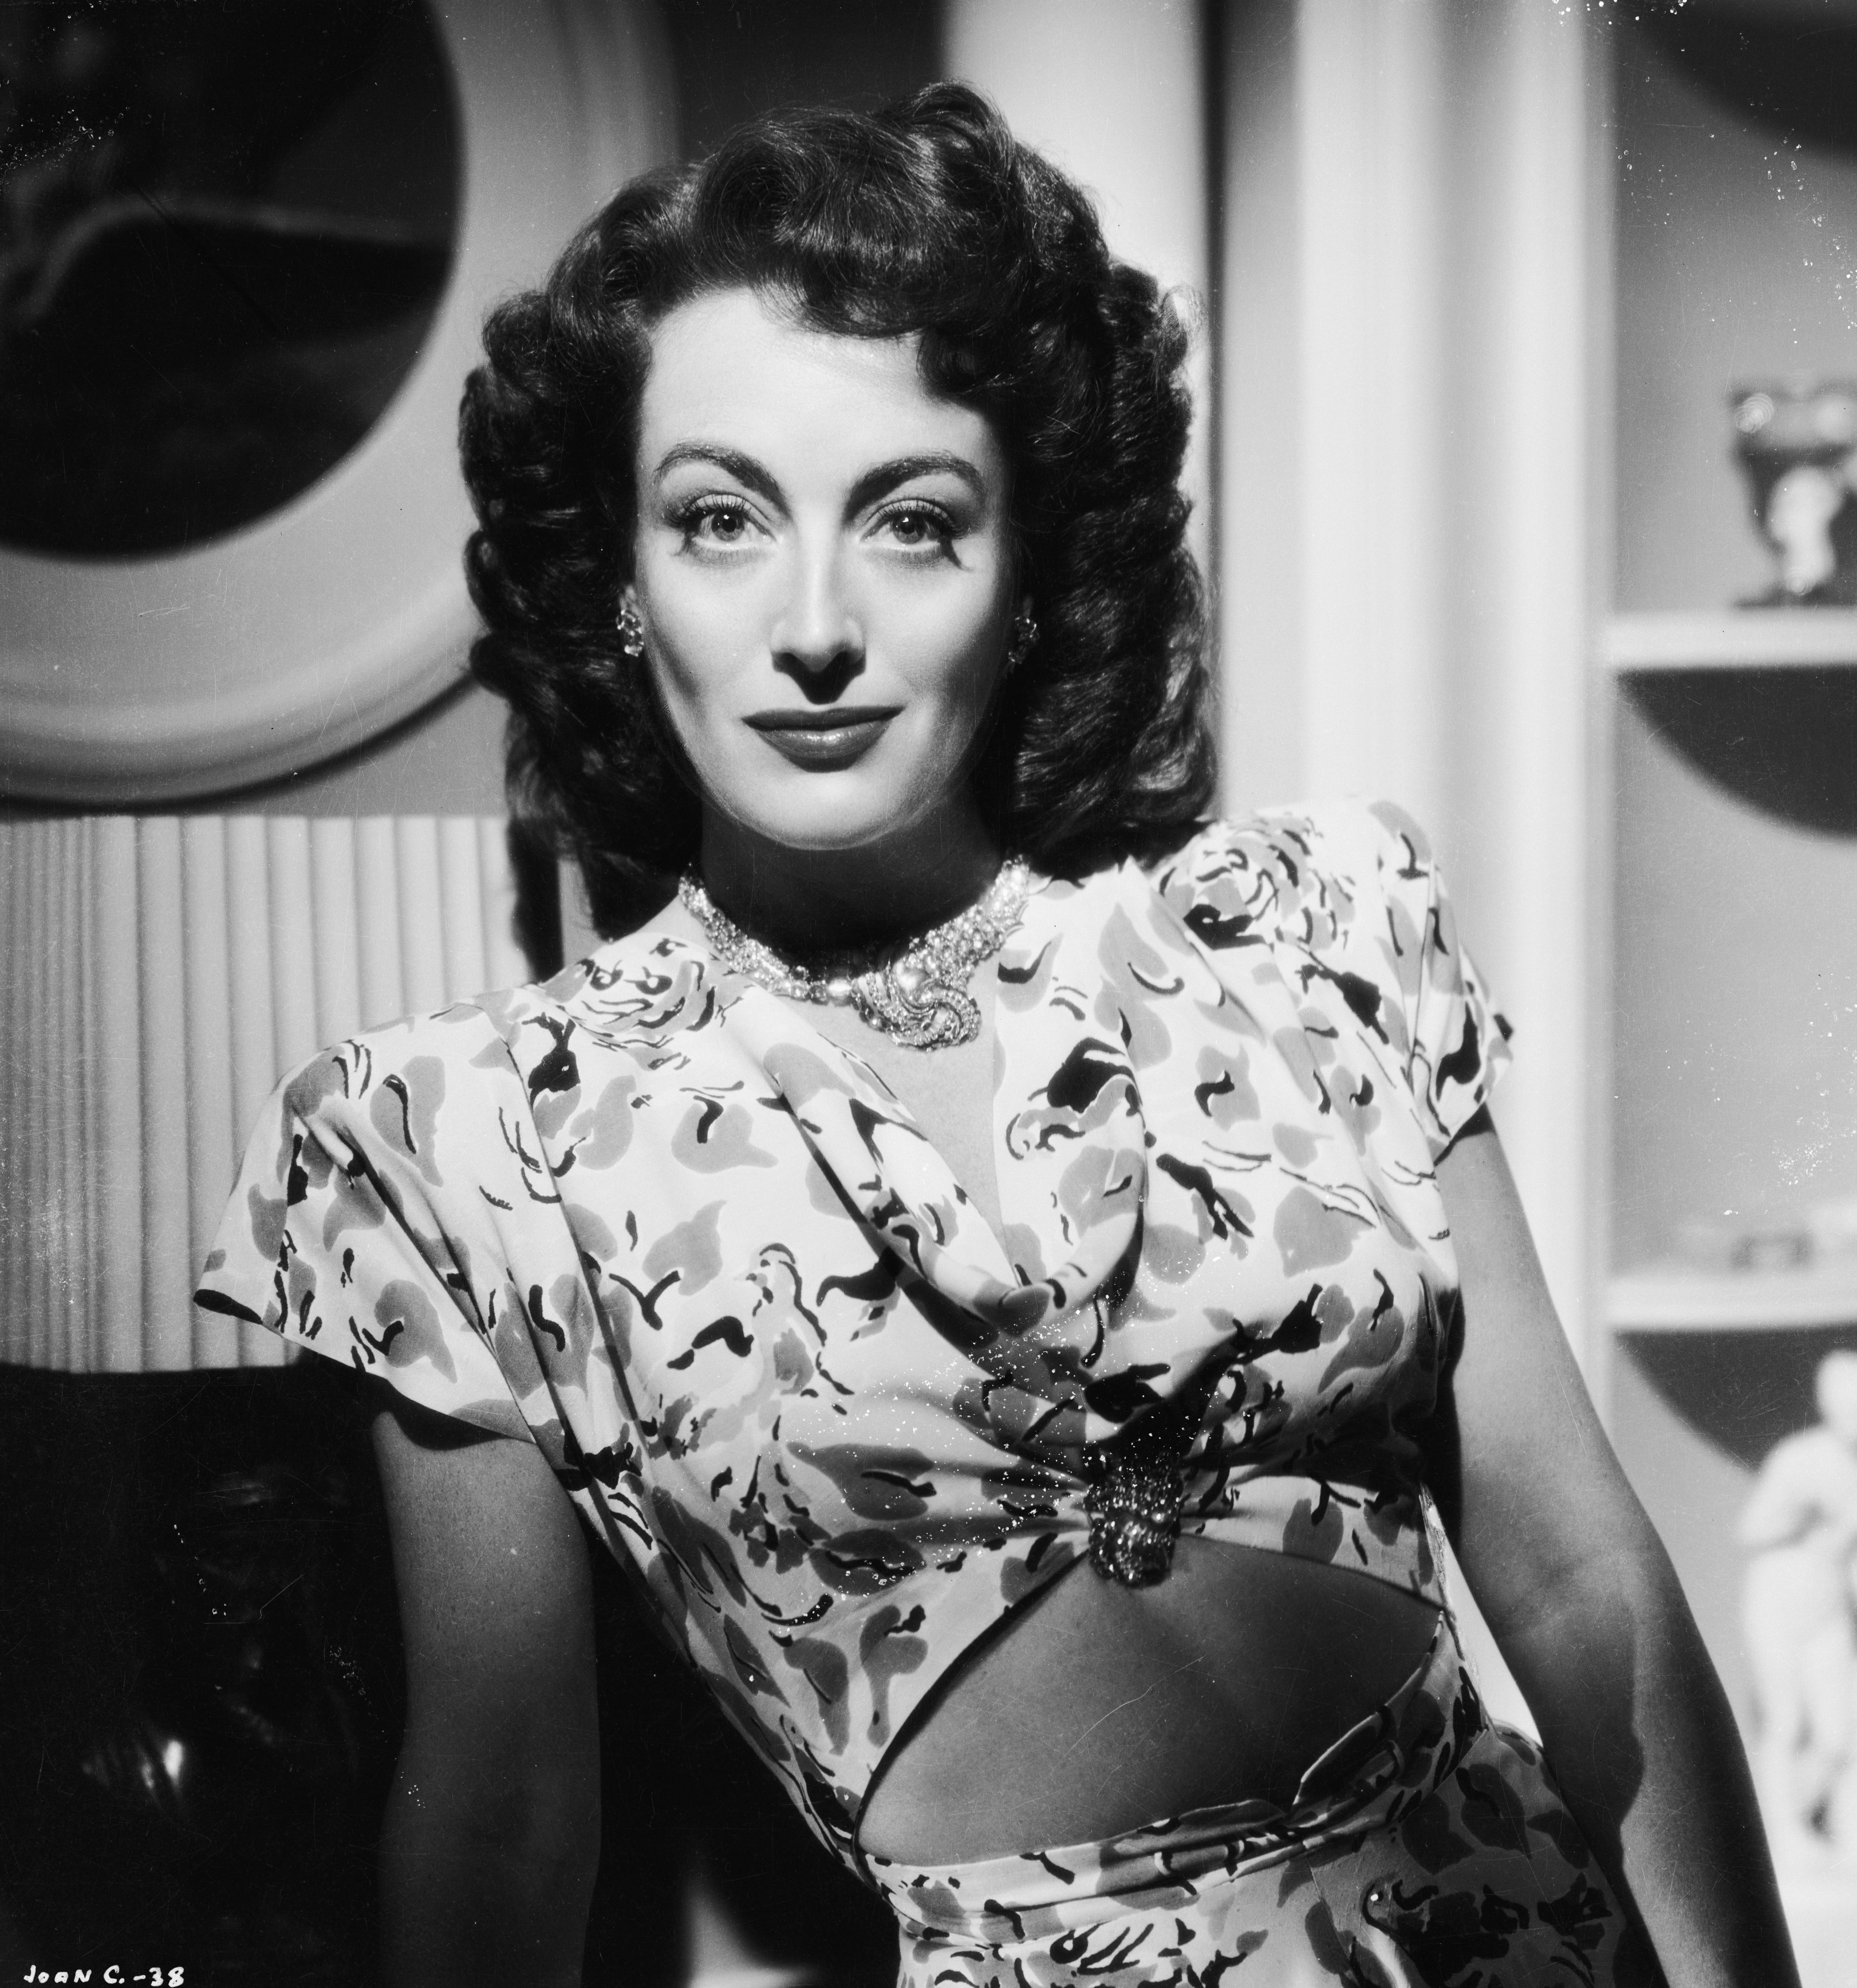  American film actress Joan Crawford (1908 - 1977) in her  starring role in 'Mildred Pierce', circa 1944:| Photo: Getty Images